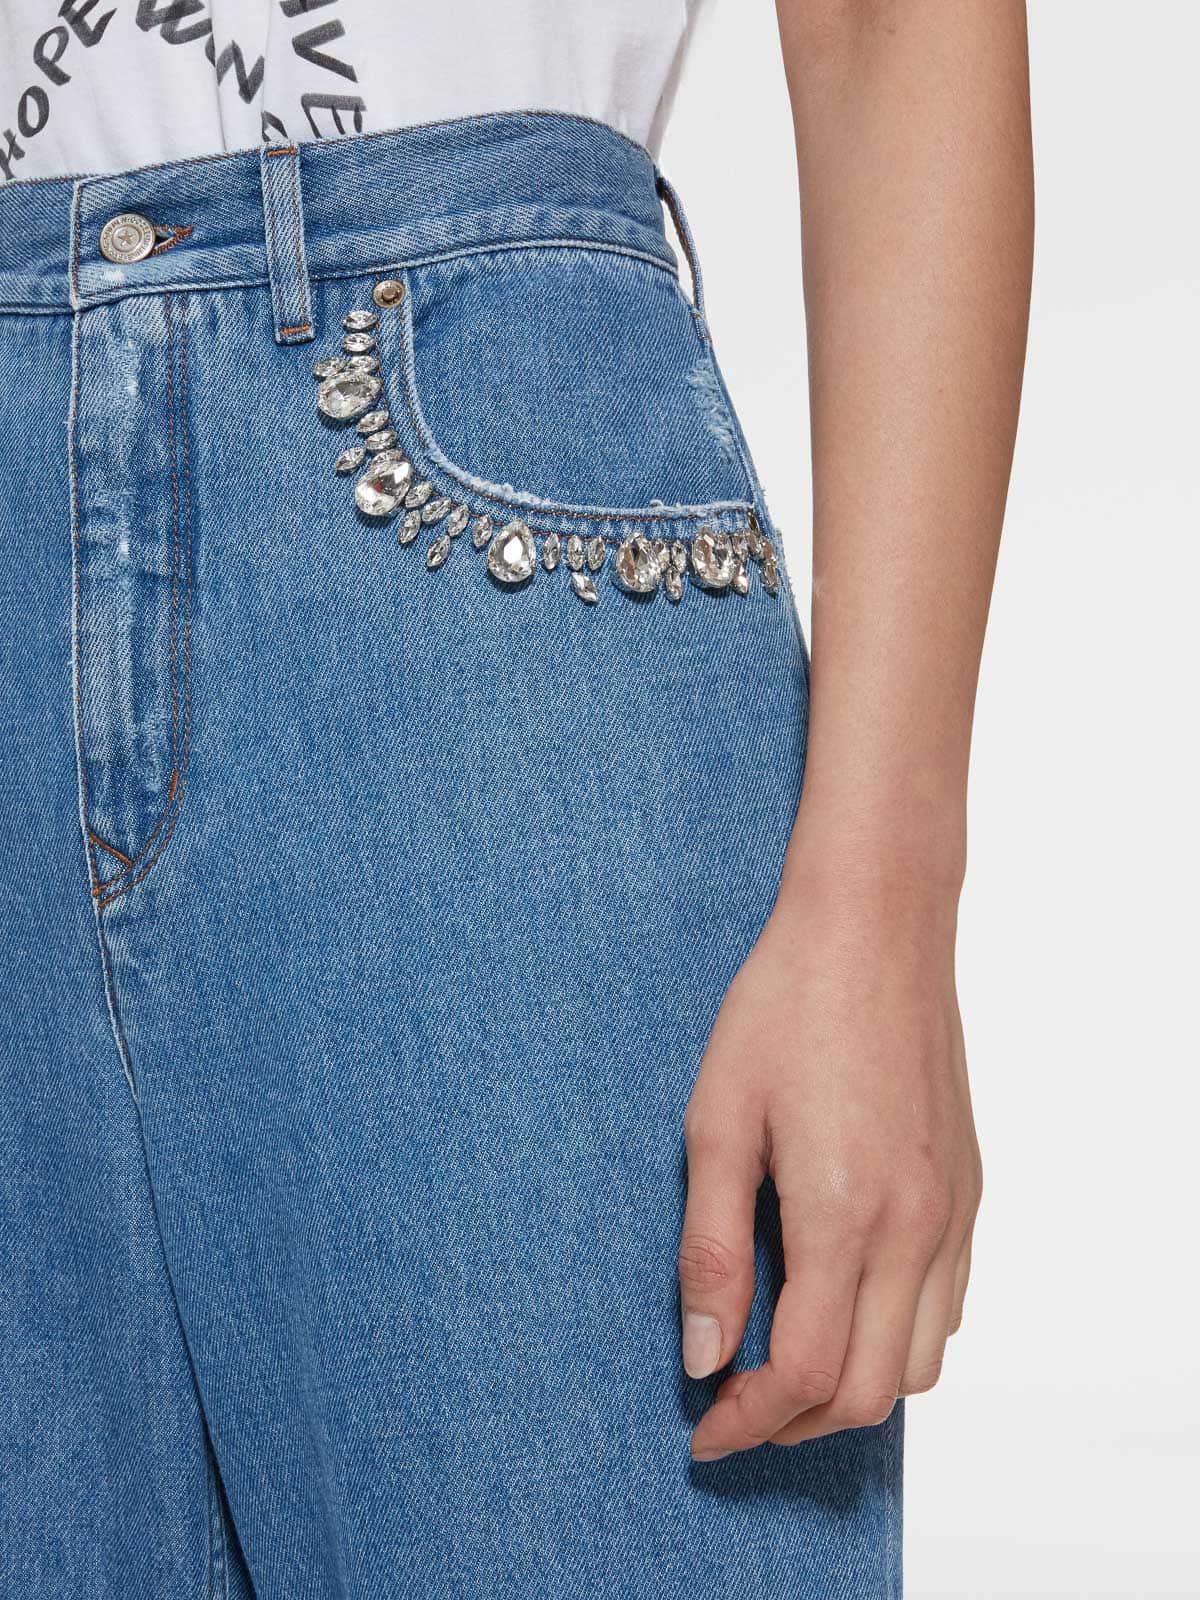 Kim denim jeans with crystals applications | Golden Goose